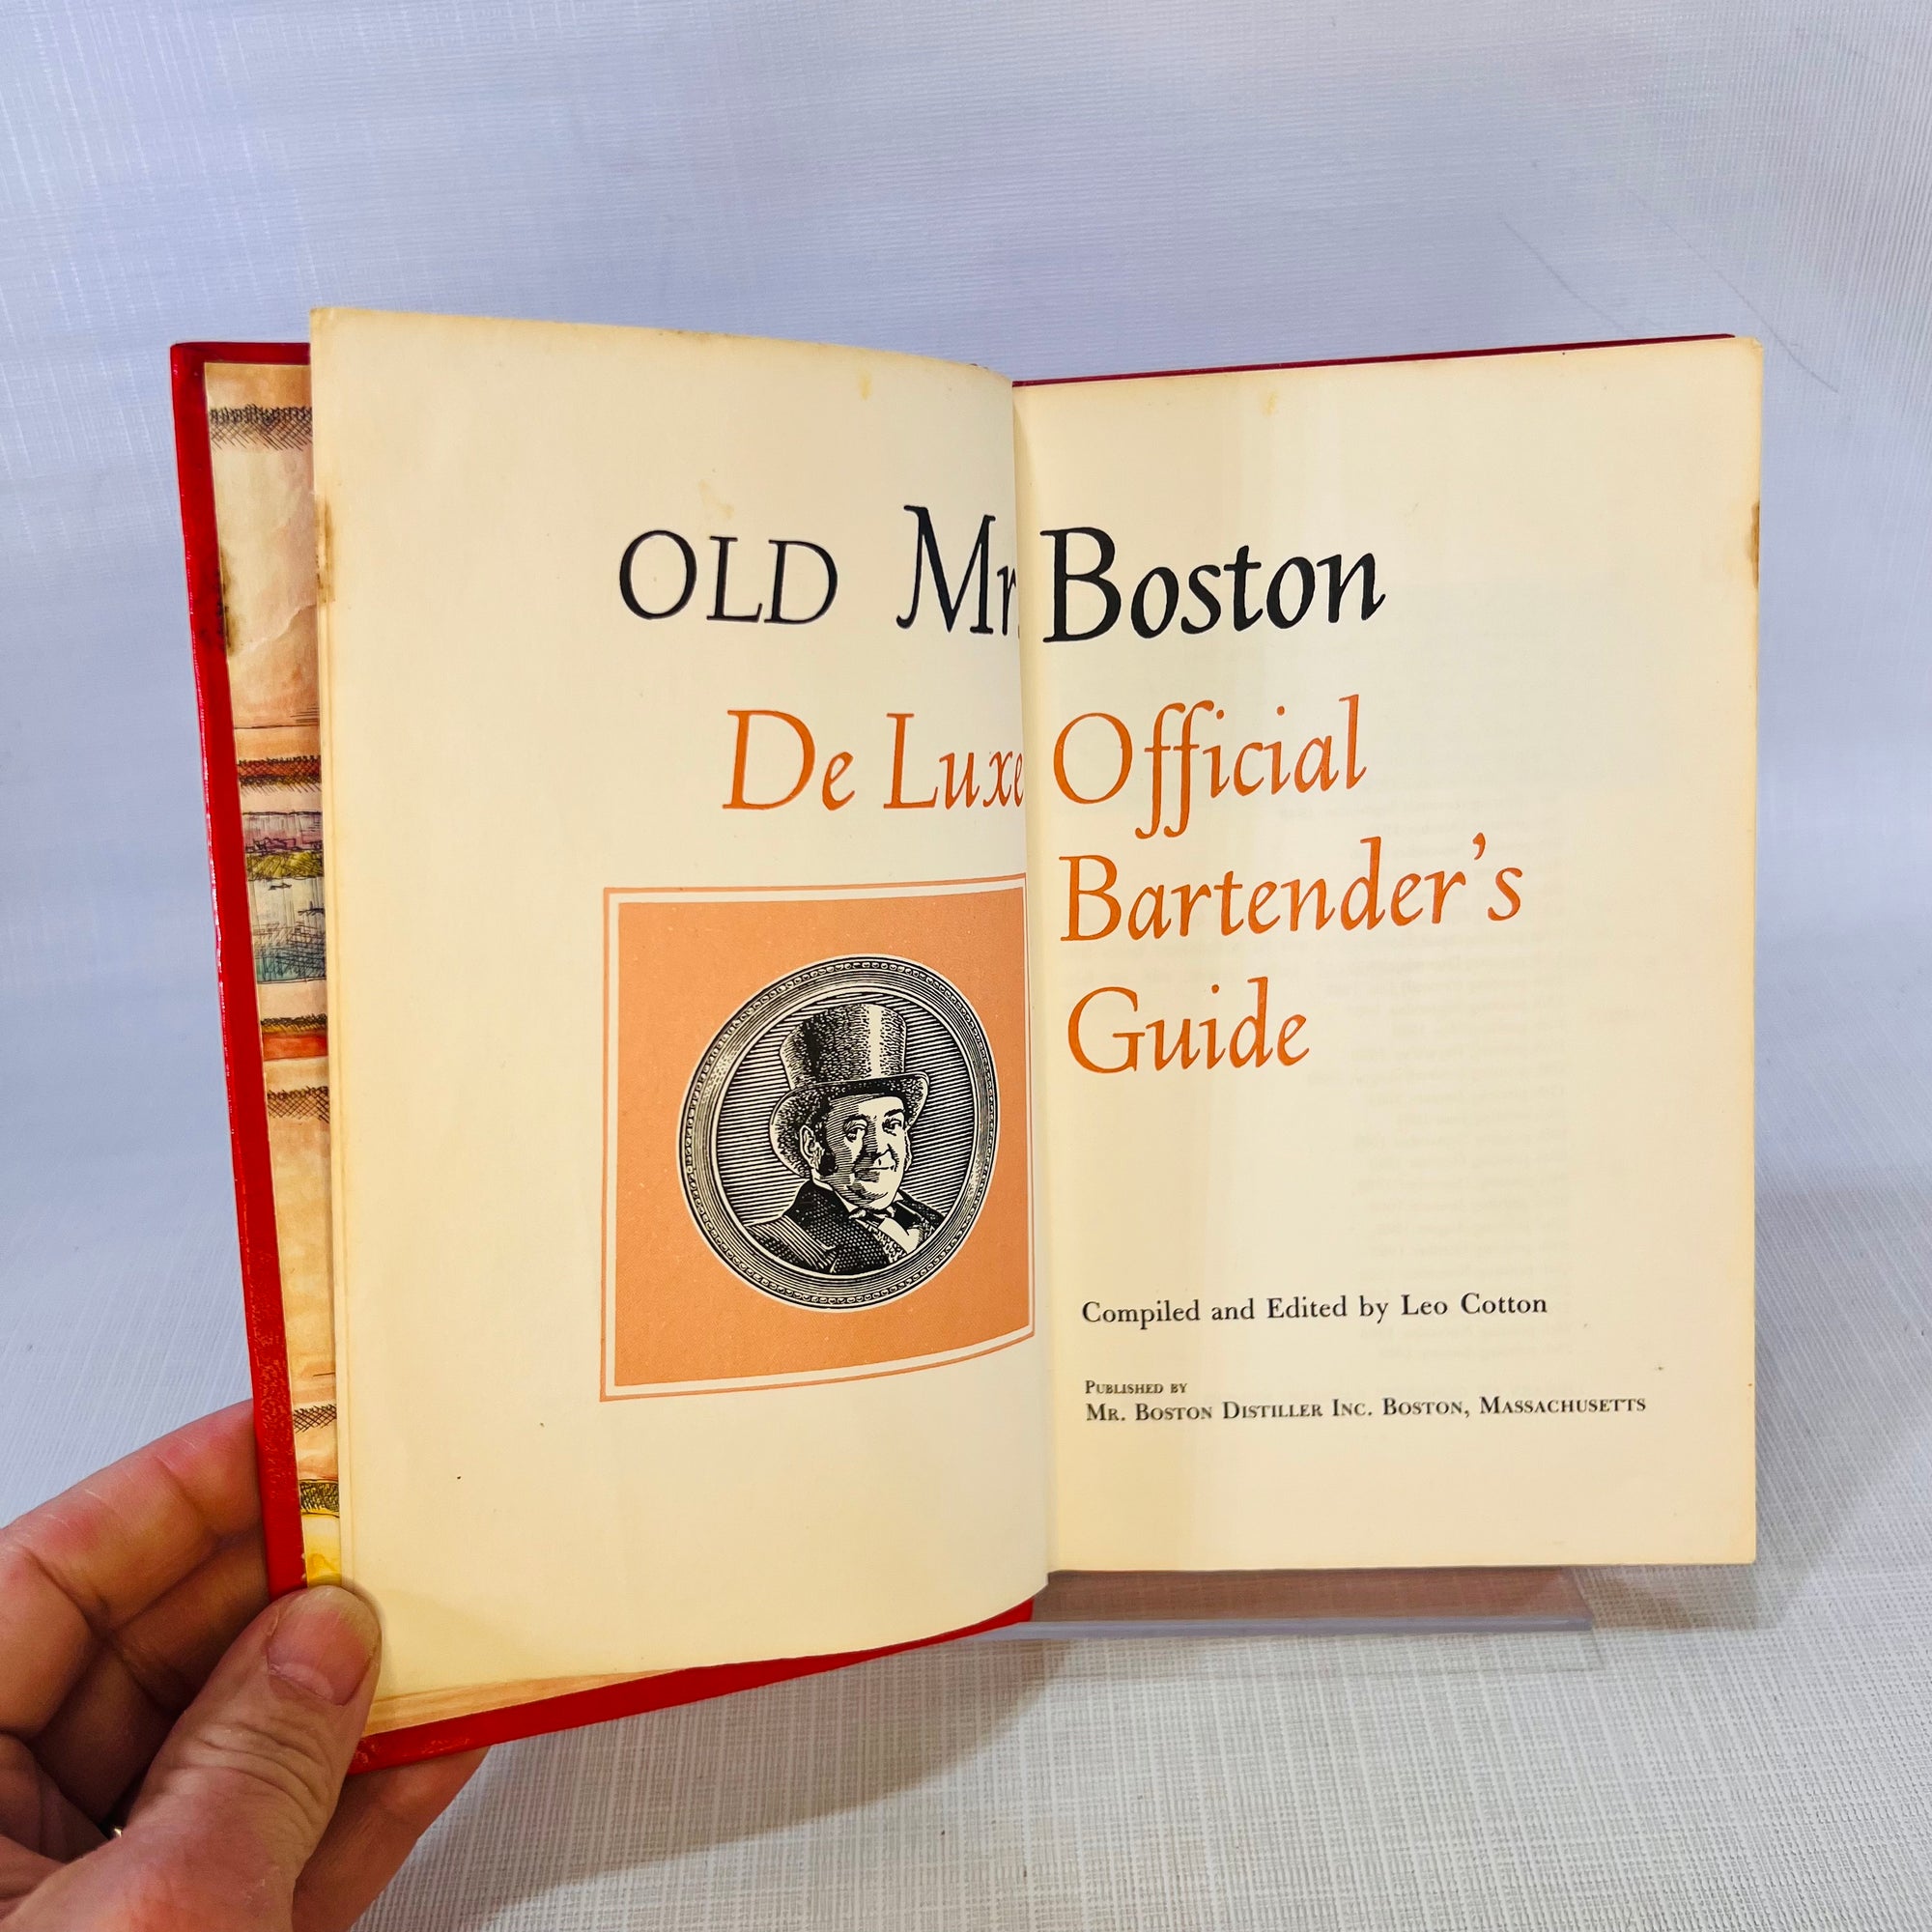 Old Mr. Boston Deluxe Official Bartenders Guide by Mr. Boston Distillers Corp 1965 Vintage Book